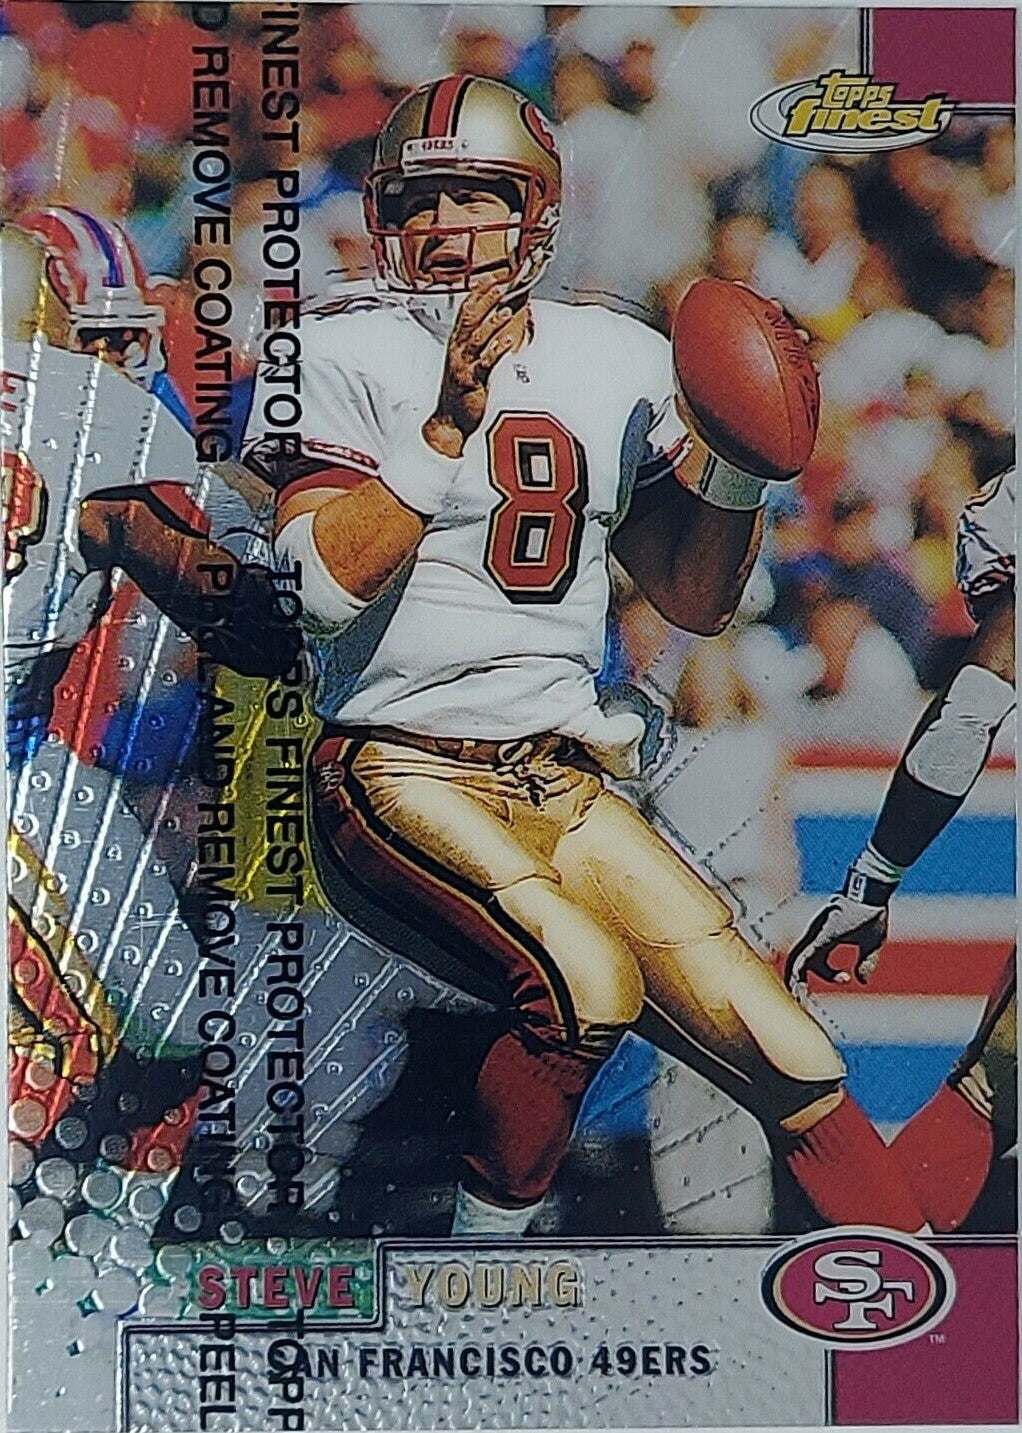 1999 TOPPS FINEST #40 STEVE YOUNG  SAN FRANCISCO 49ERS